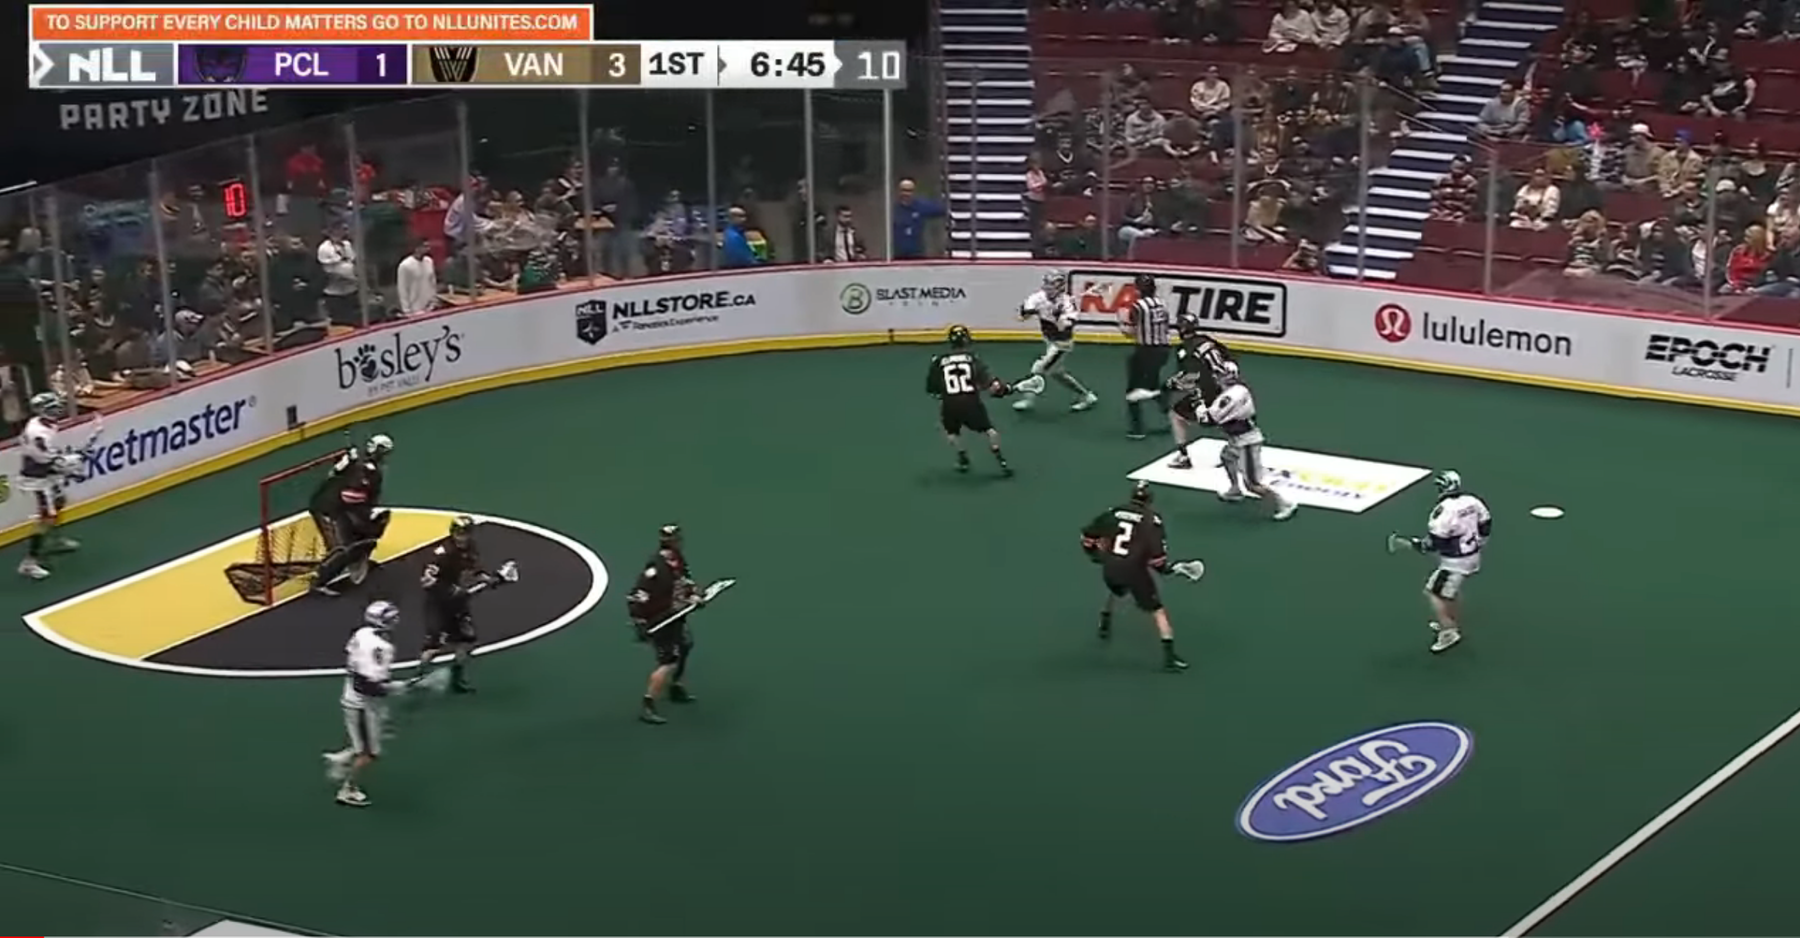 Blast Media Print Ads on boards at The Vancouver Warriors game